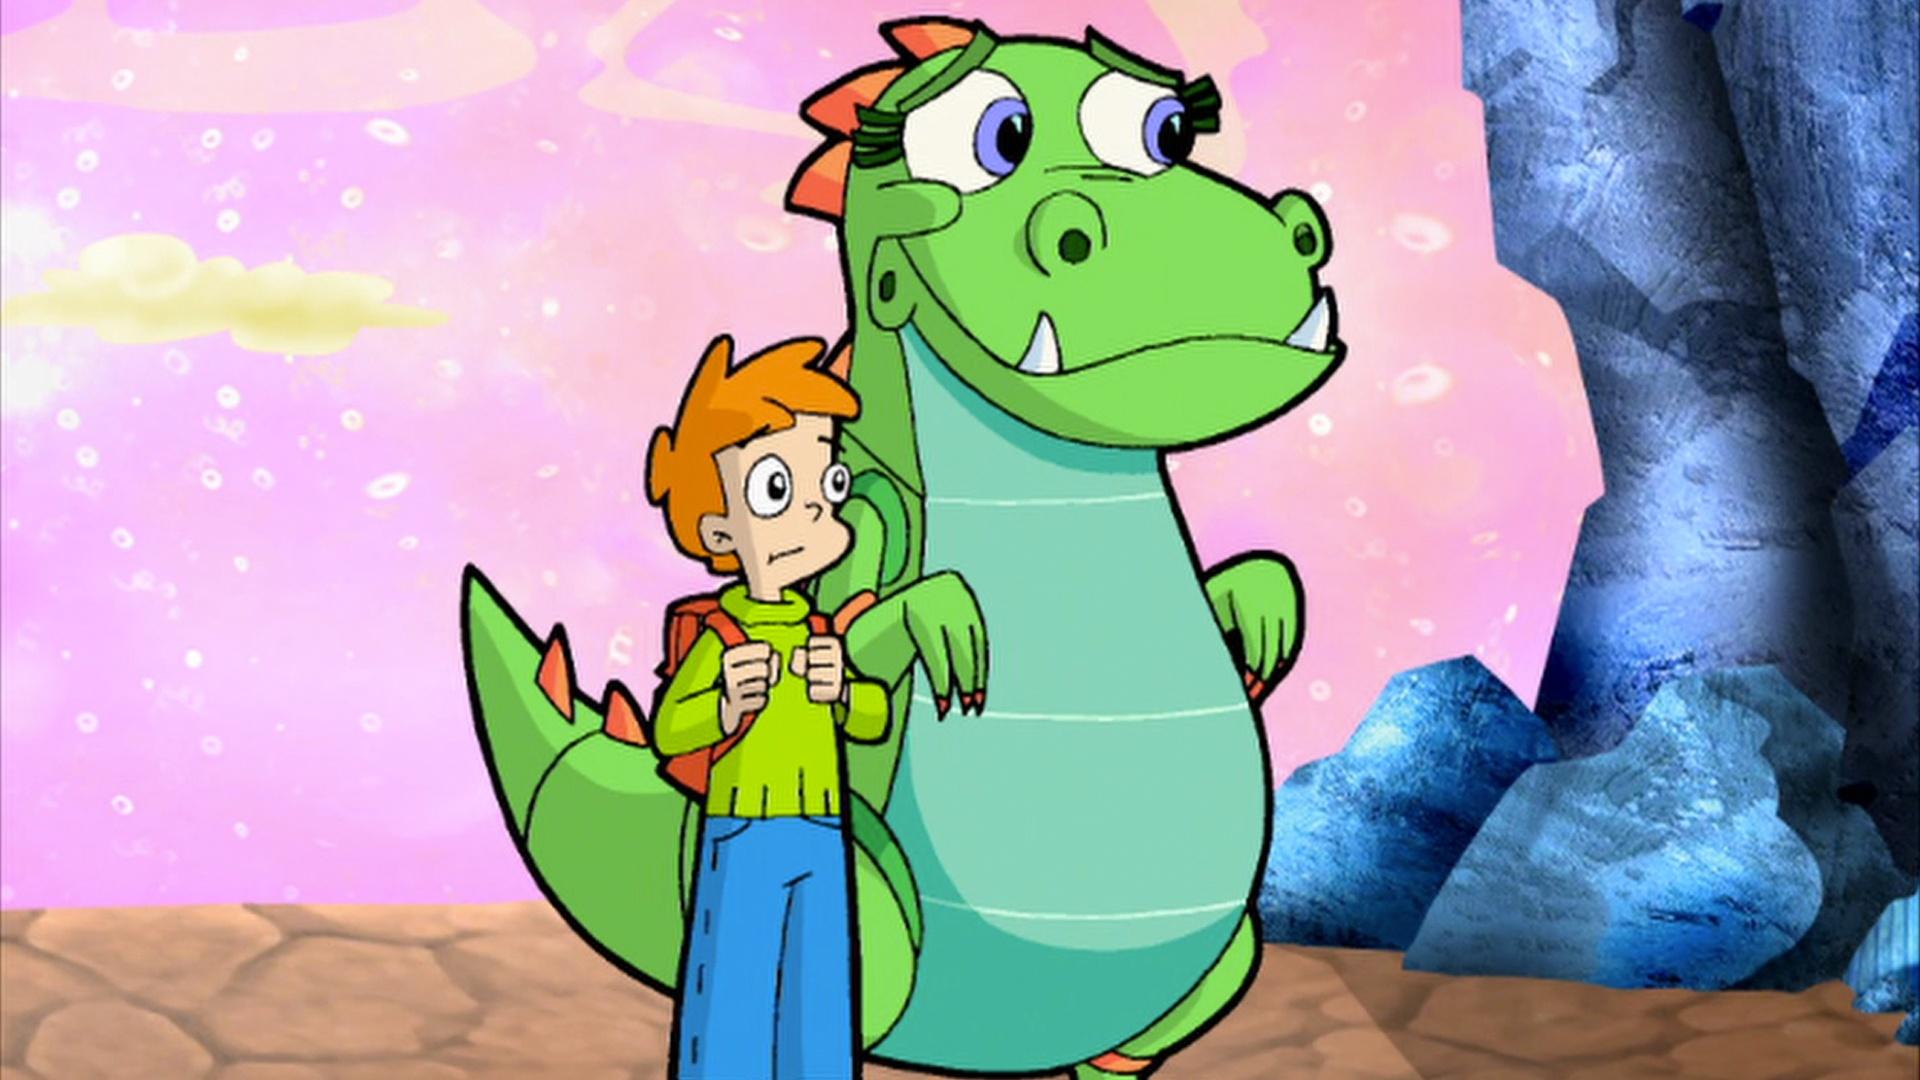 New Episodes of <em>Cyberchase</em> Kick Off Just in Time for Earth Day  2018 • Connecticut Public Television